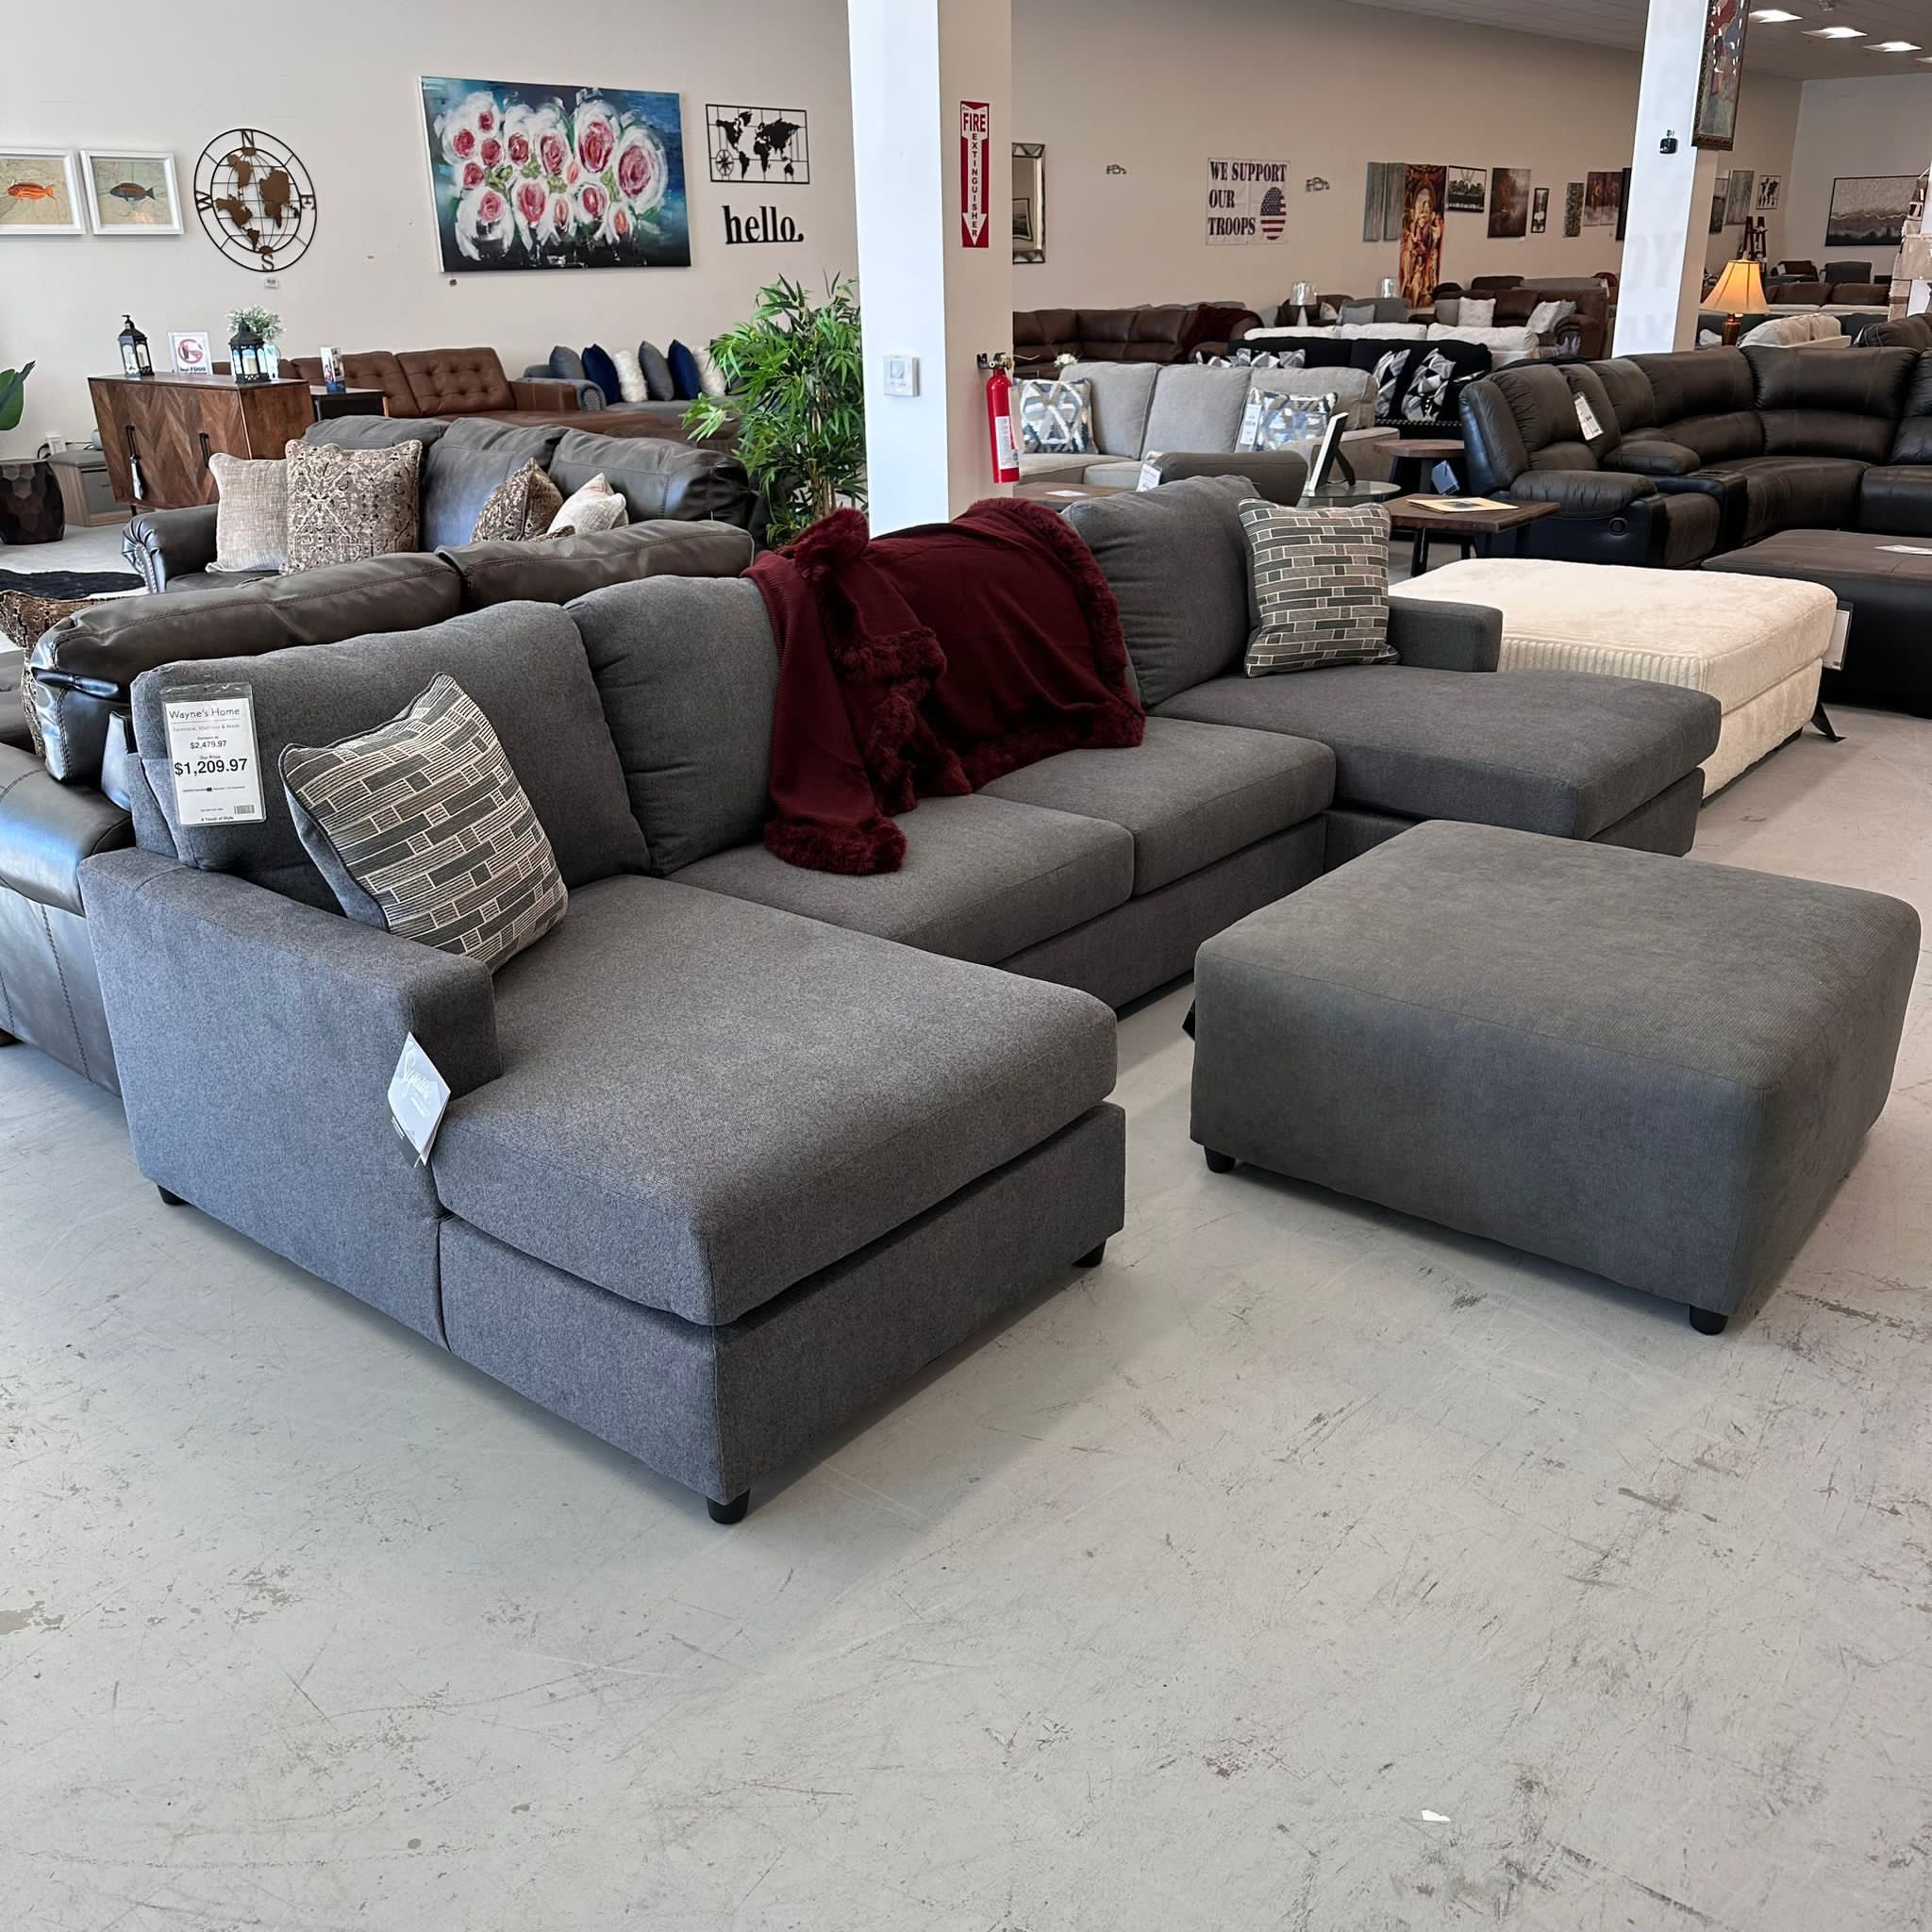 Brand New ashley Sectional With Ottoman. Free Curbside Delivery 